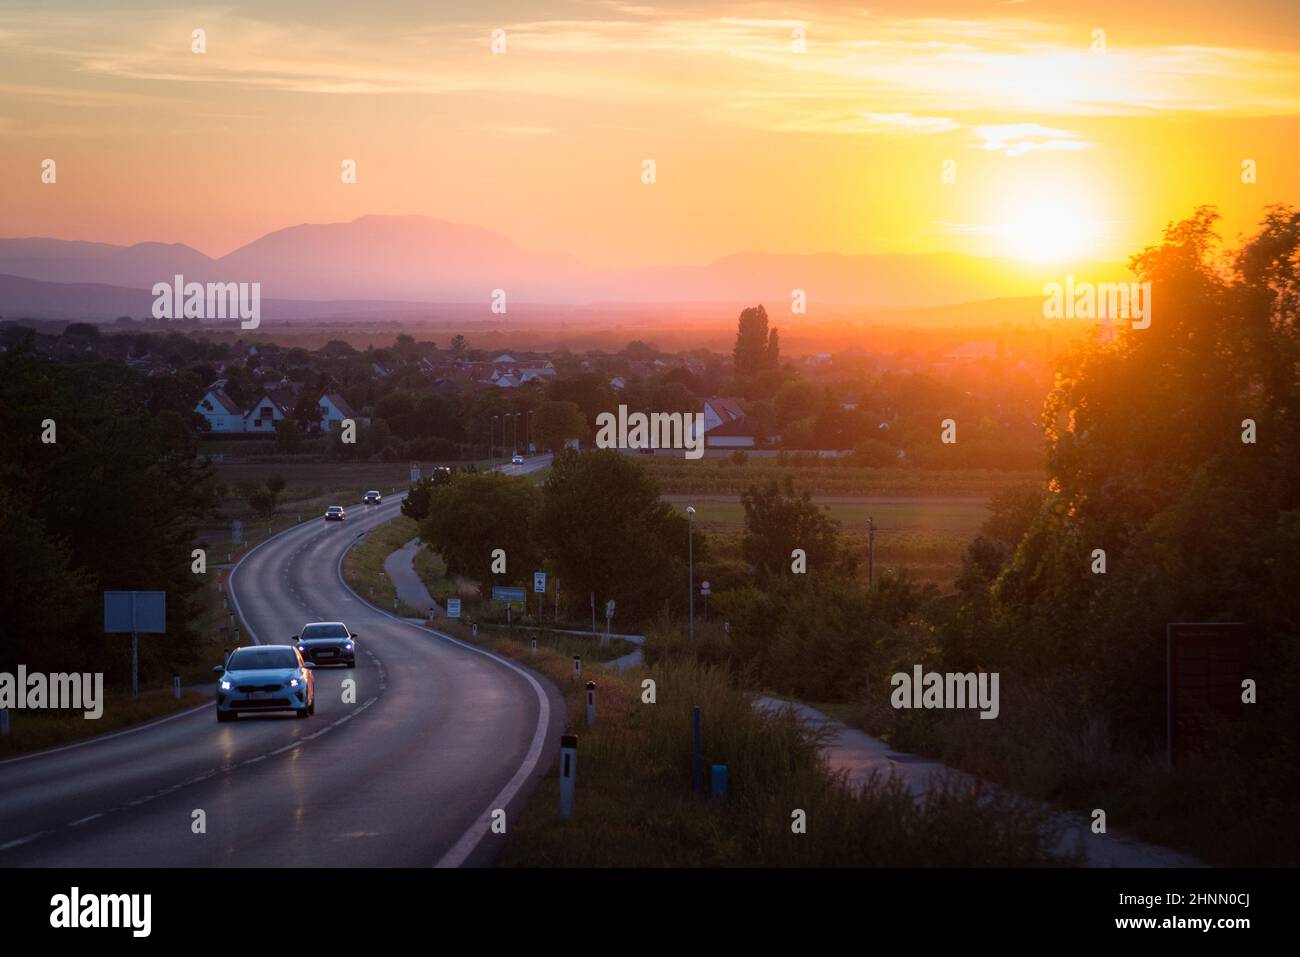 traffic on asphalt road or highway route at sunset time Stock Photo